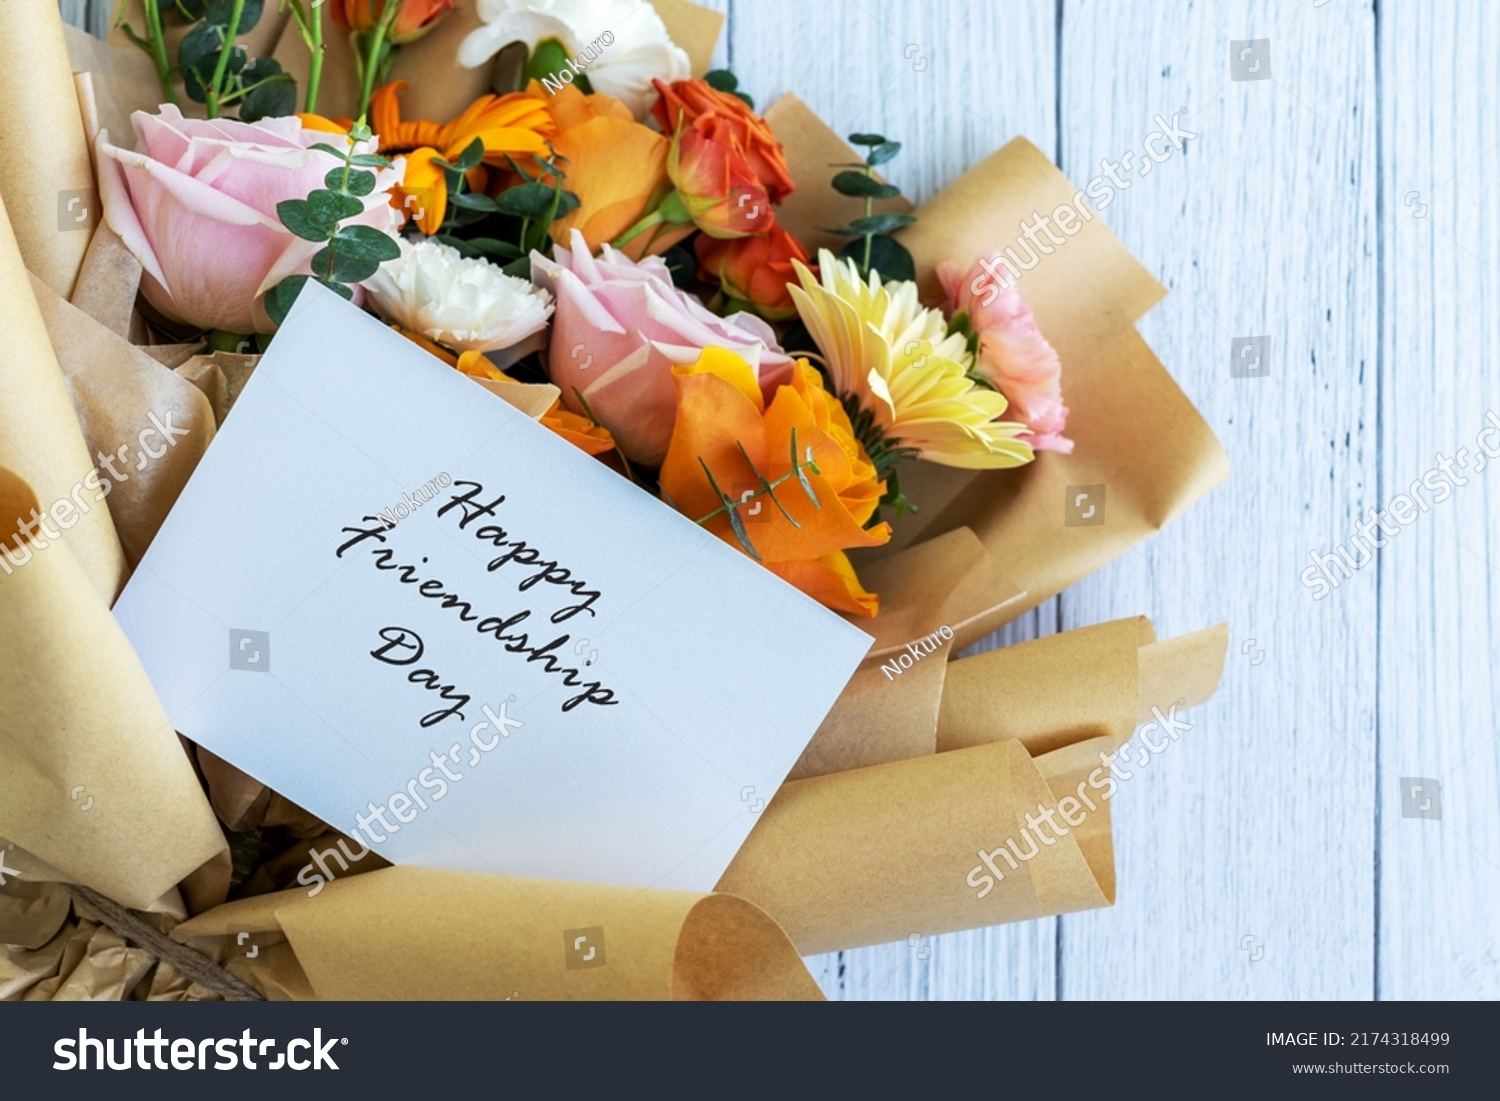 Happy Friendship Day Card With Mixed Flower Bouquet #2174318499